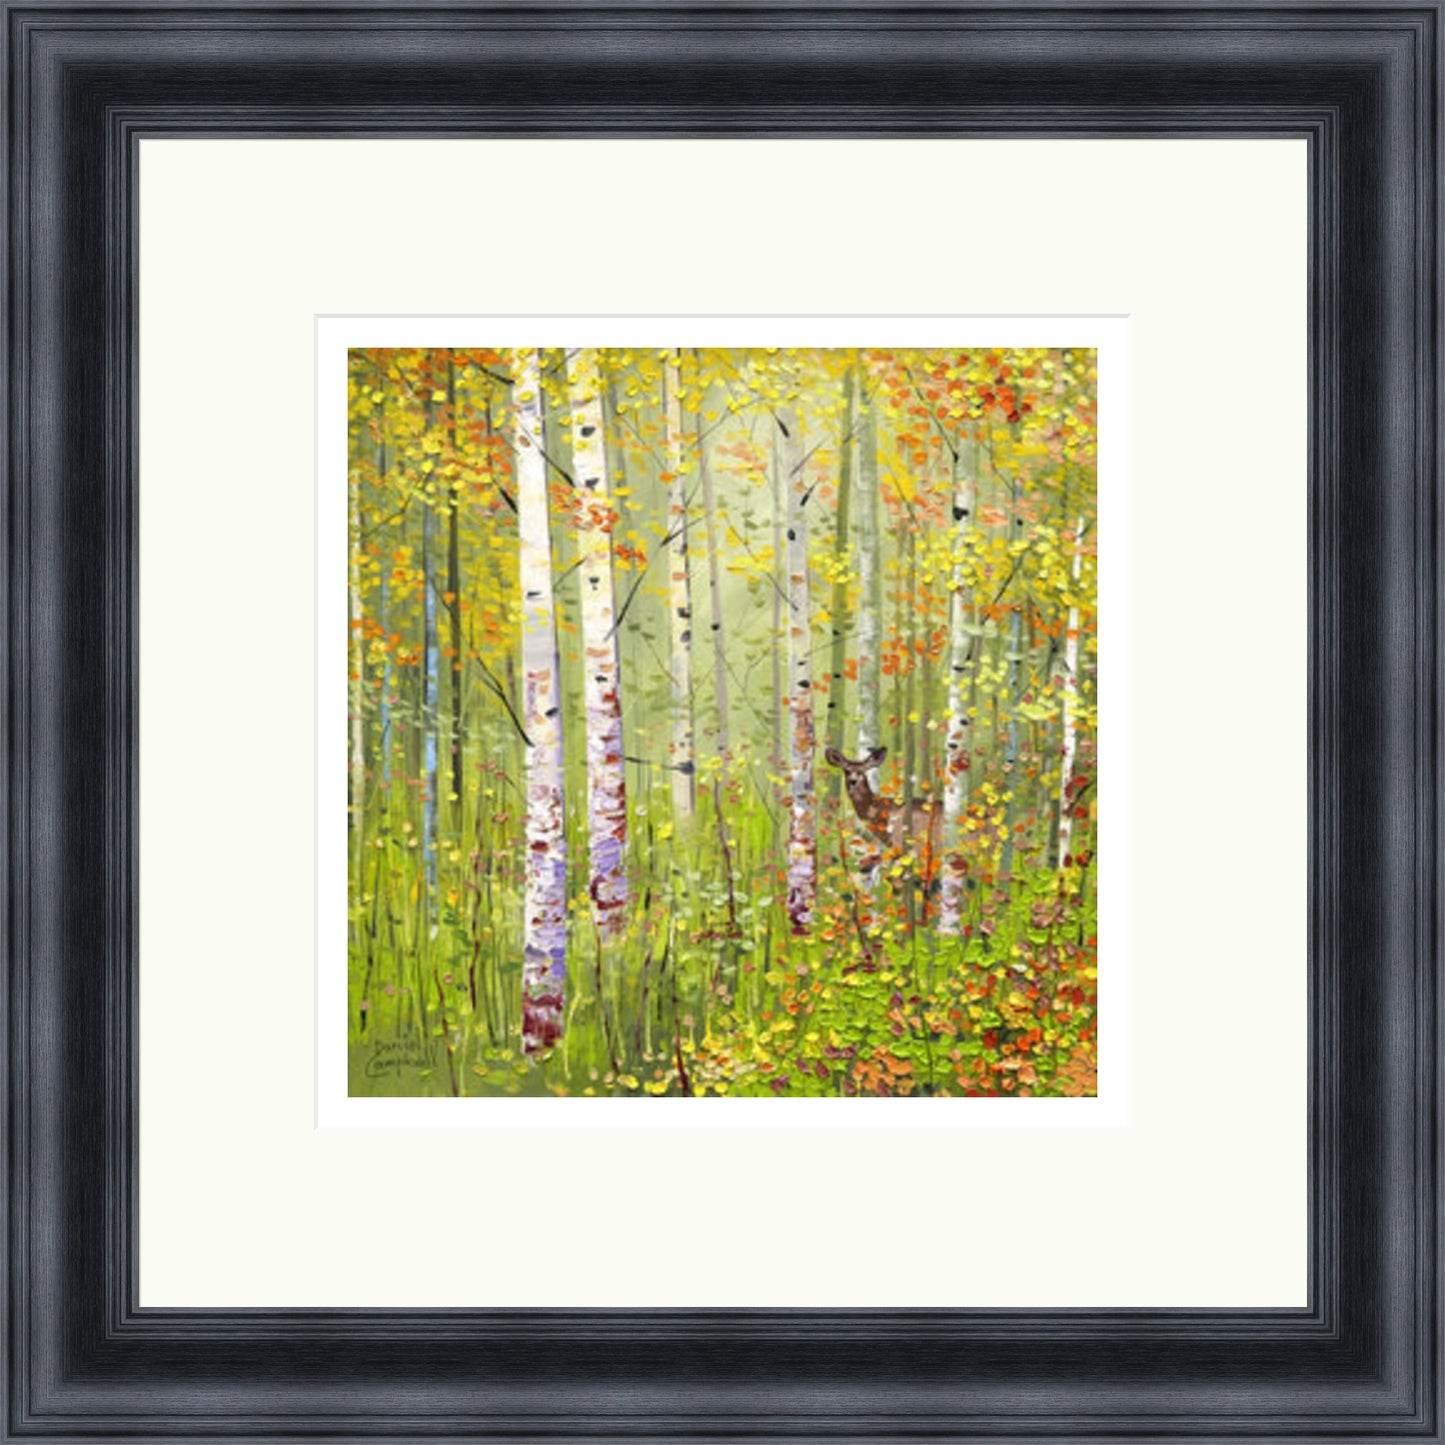 Silver Birches in Spring by Daniel Campbell